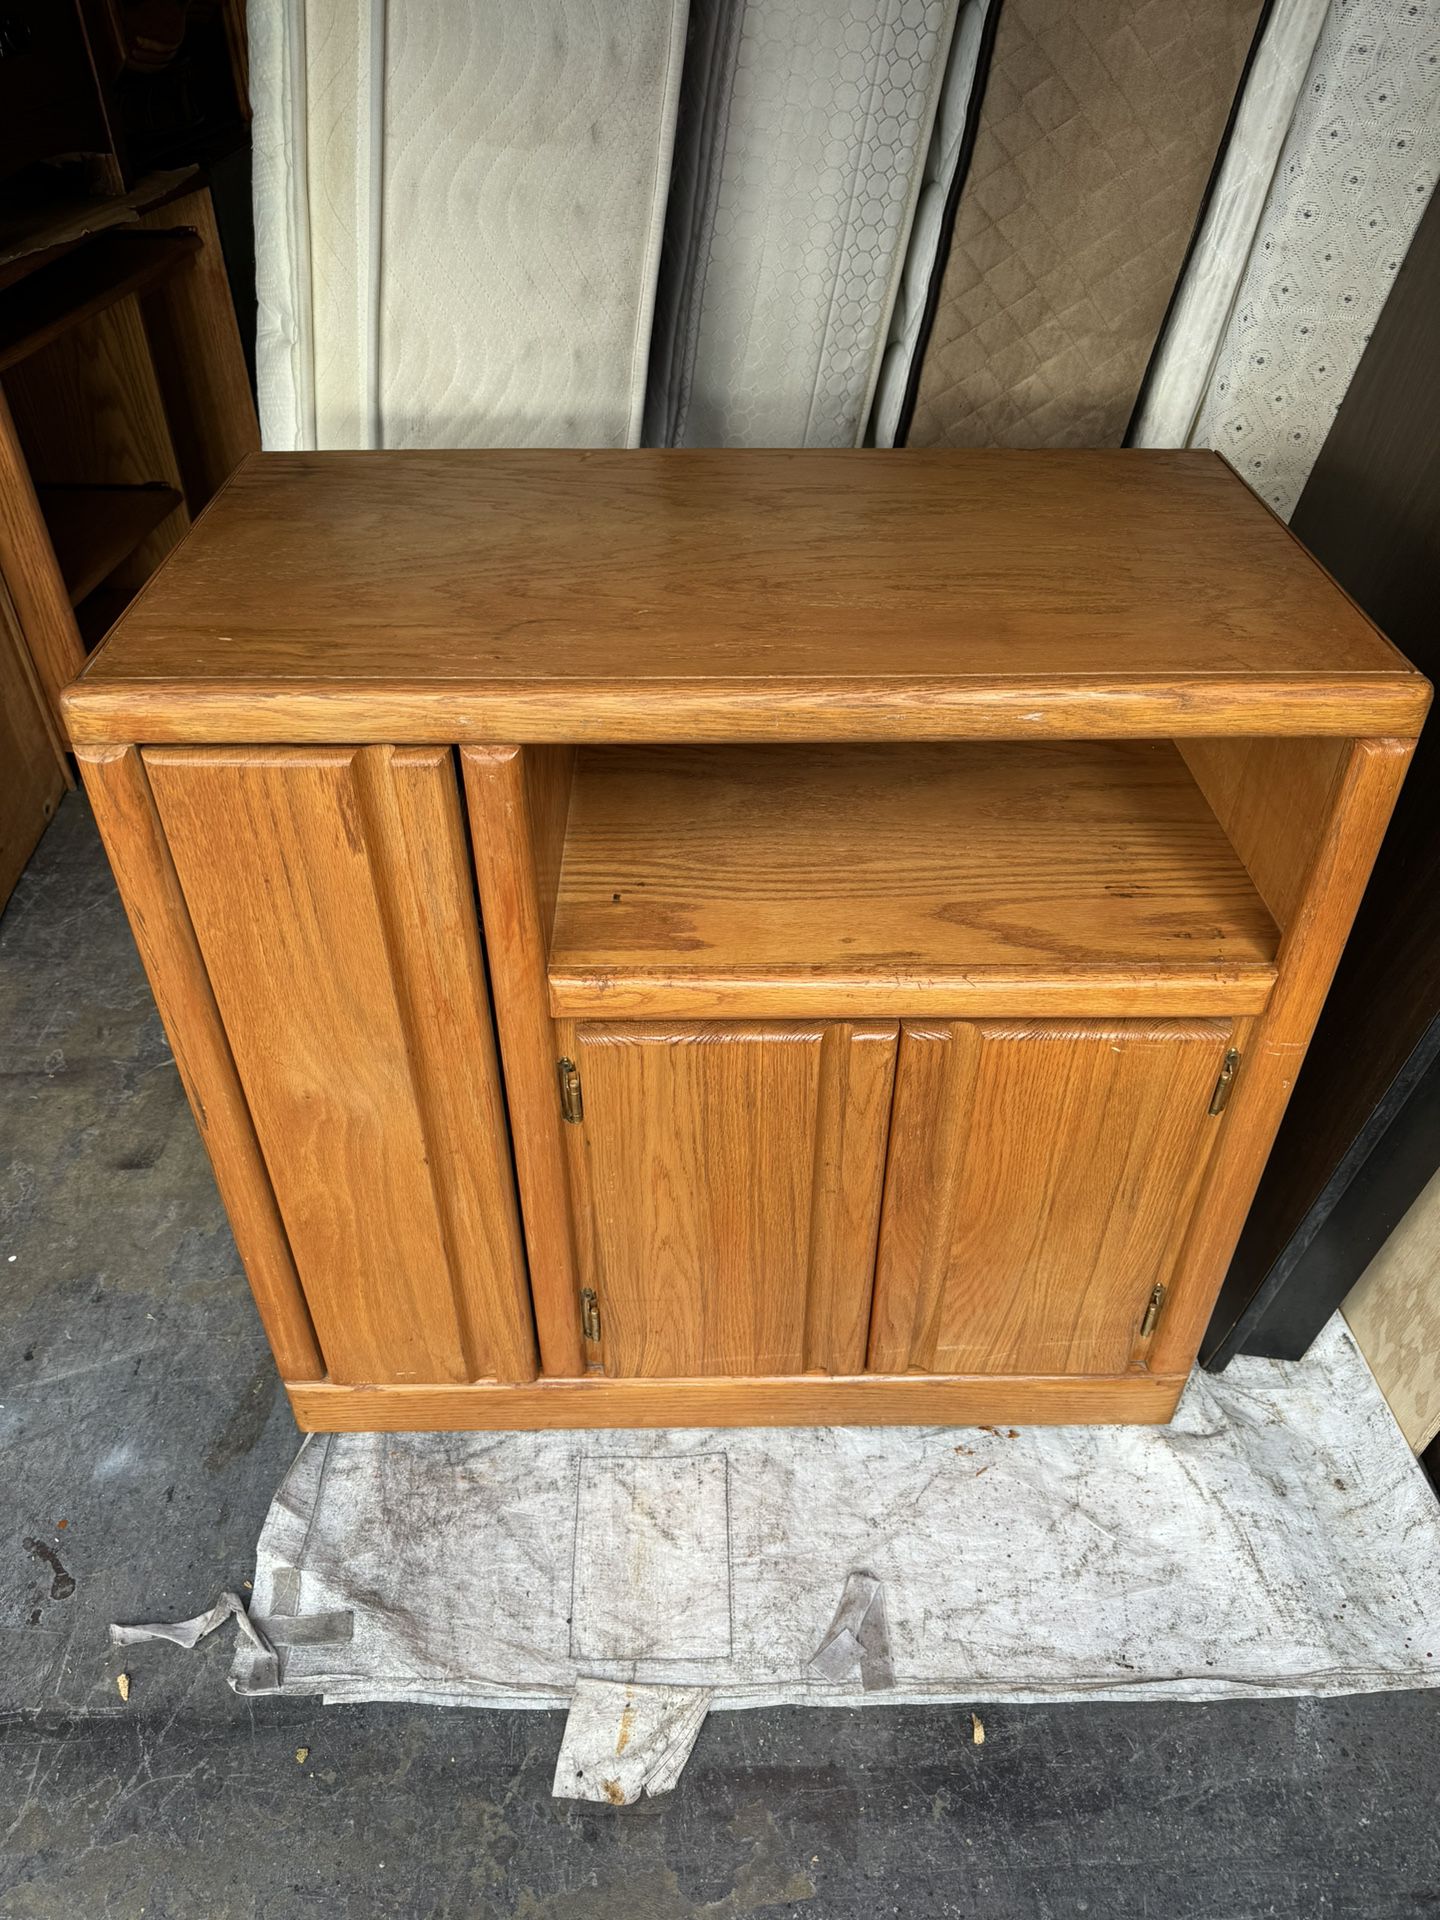 Traditional solid wood kitchen storage /pantry / printer / cabinet / TV entertainment center media console on wheels. 